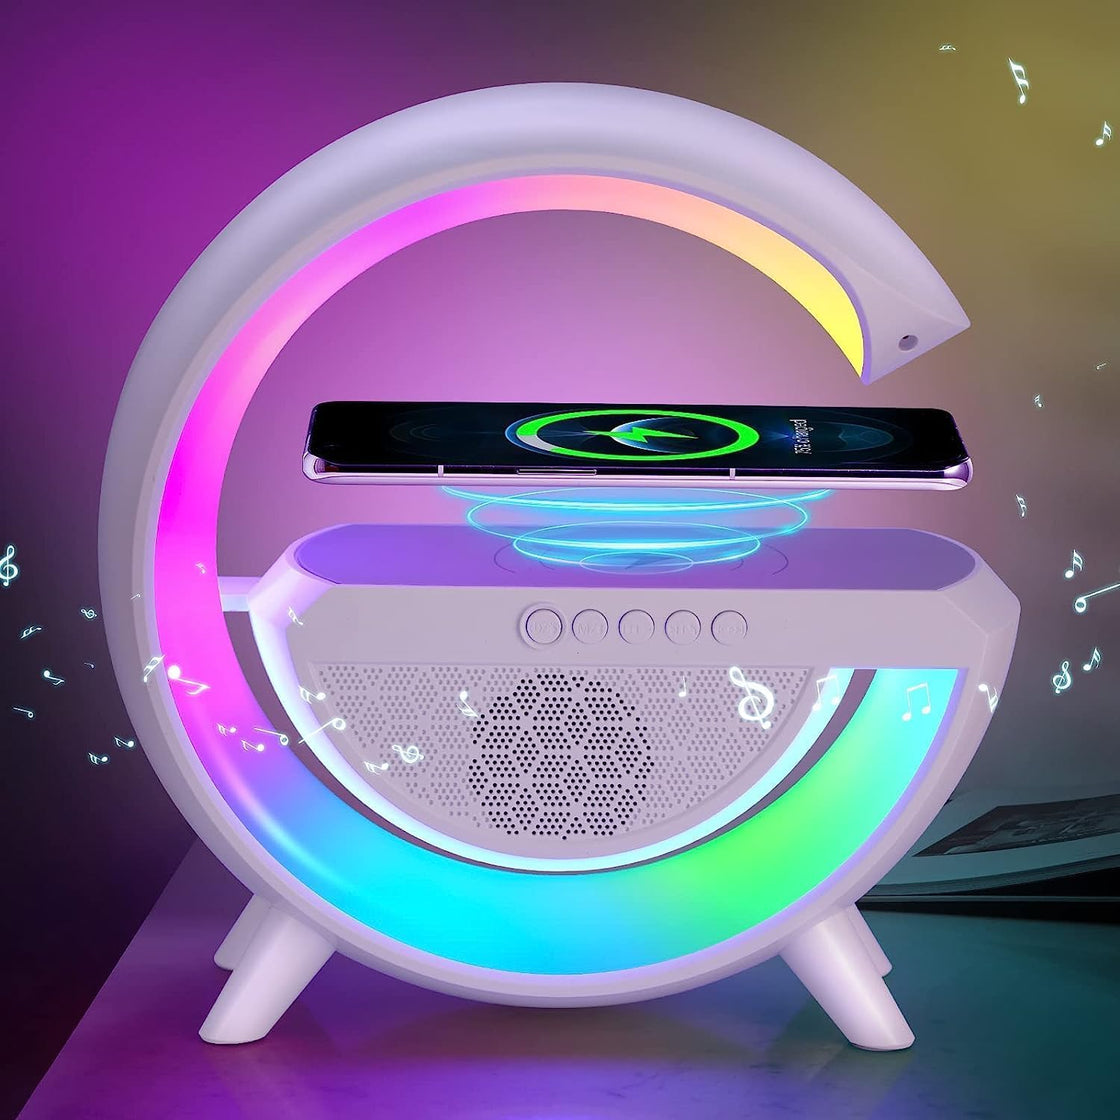 Transform Your Space with the G Speaker Lamp - APP Control 3 in 1 Multi-Function Bluetooth Speaker!